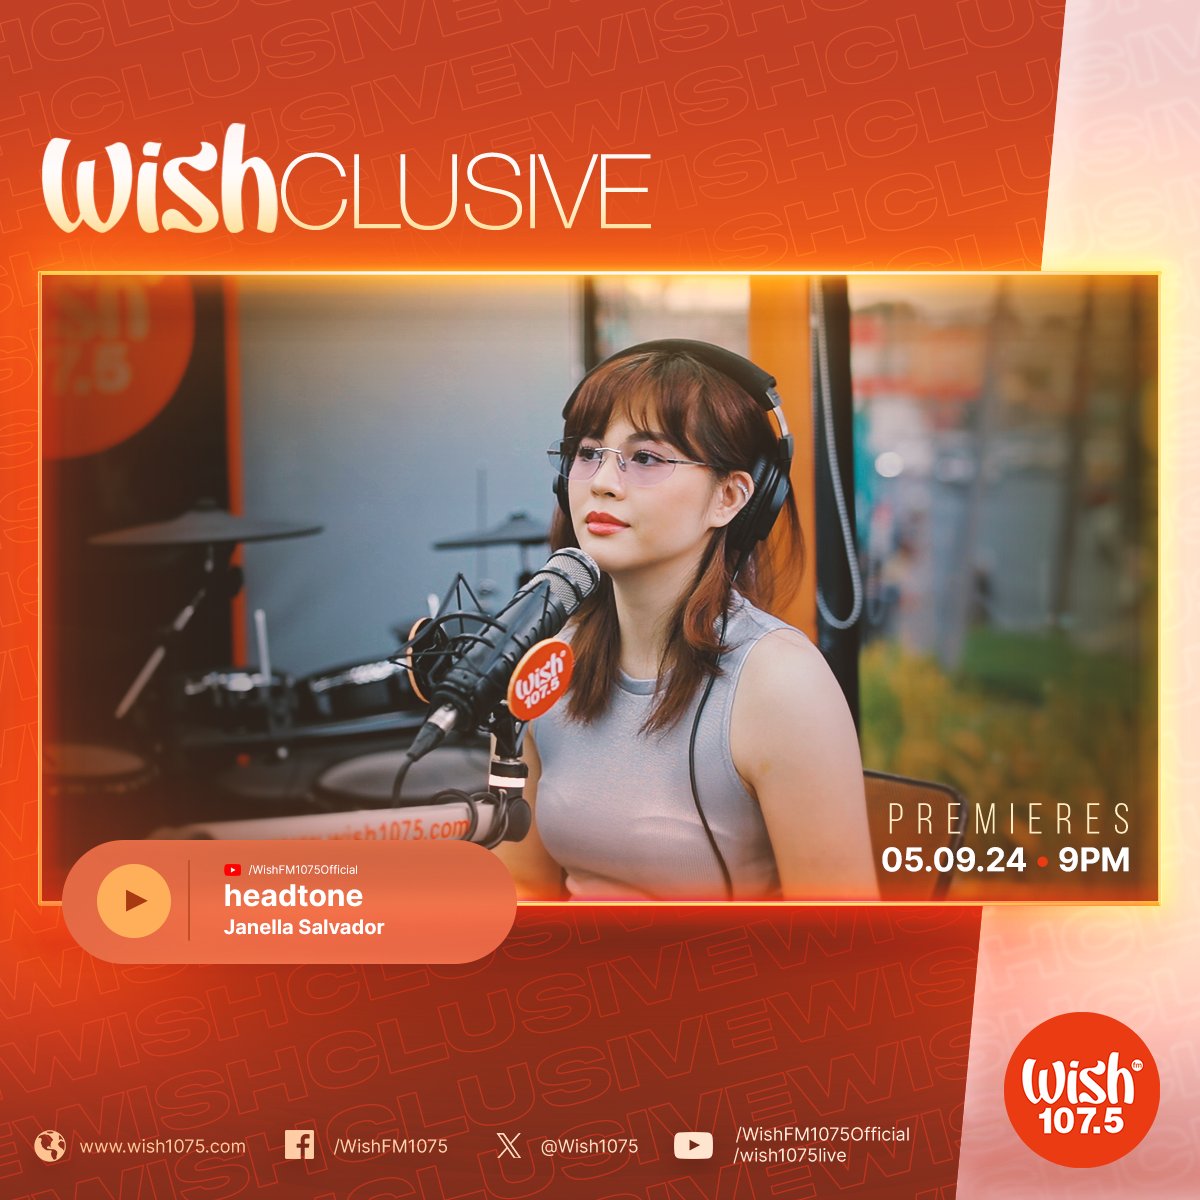 .@superjanella is coming back with a fresh track and a whole new vibe for tonight's Wishclusive! Catch 'headtone,' premiering at 9 p.m. on our YouTube channel!